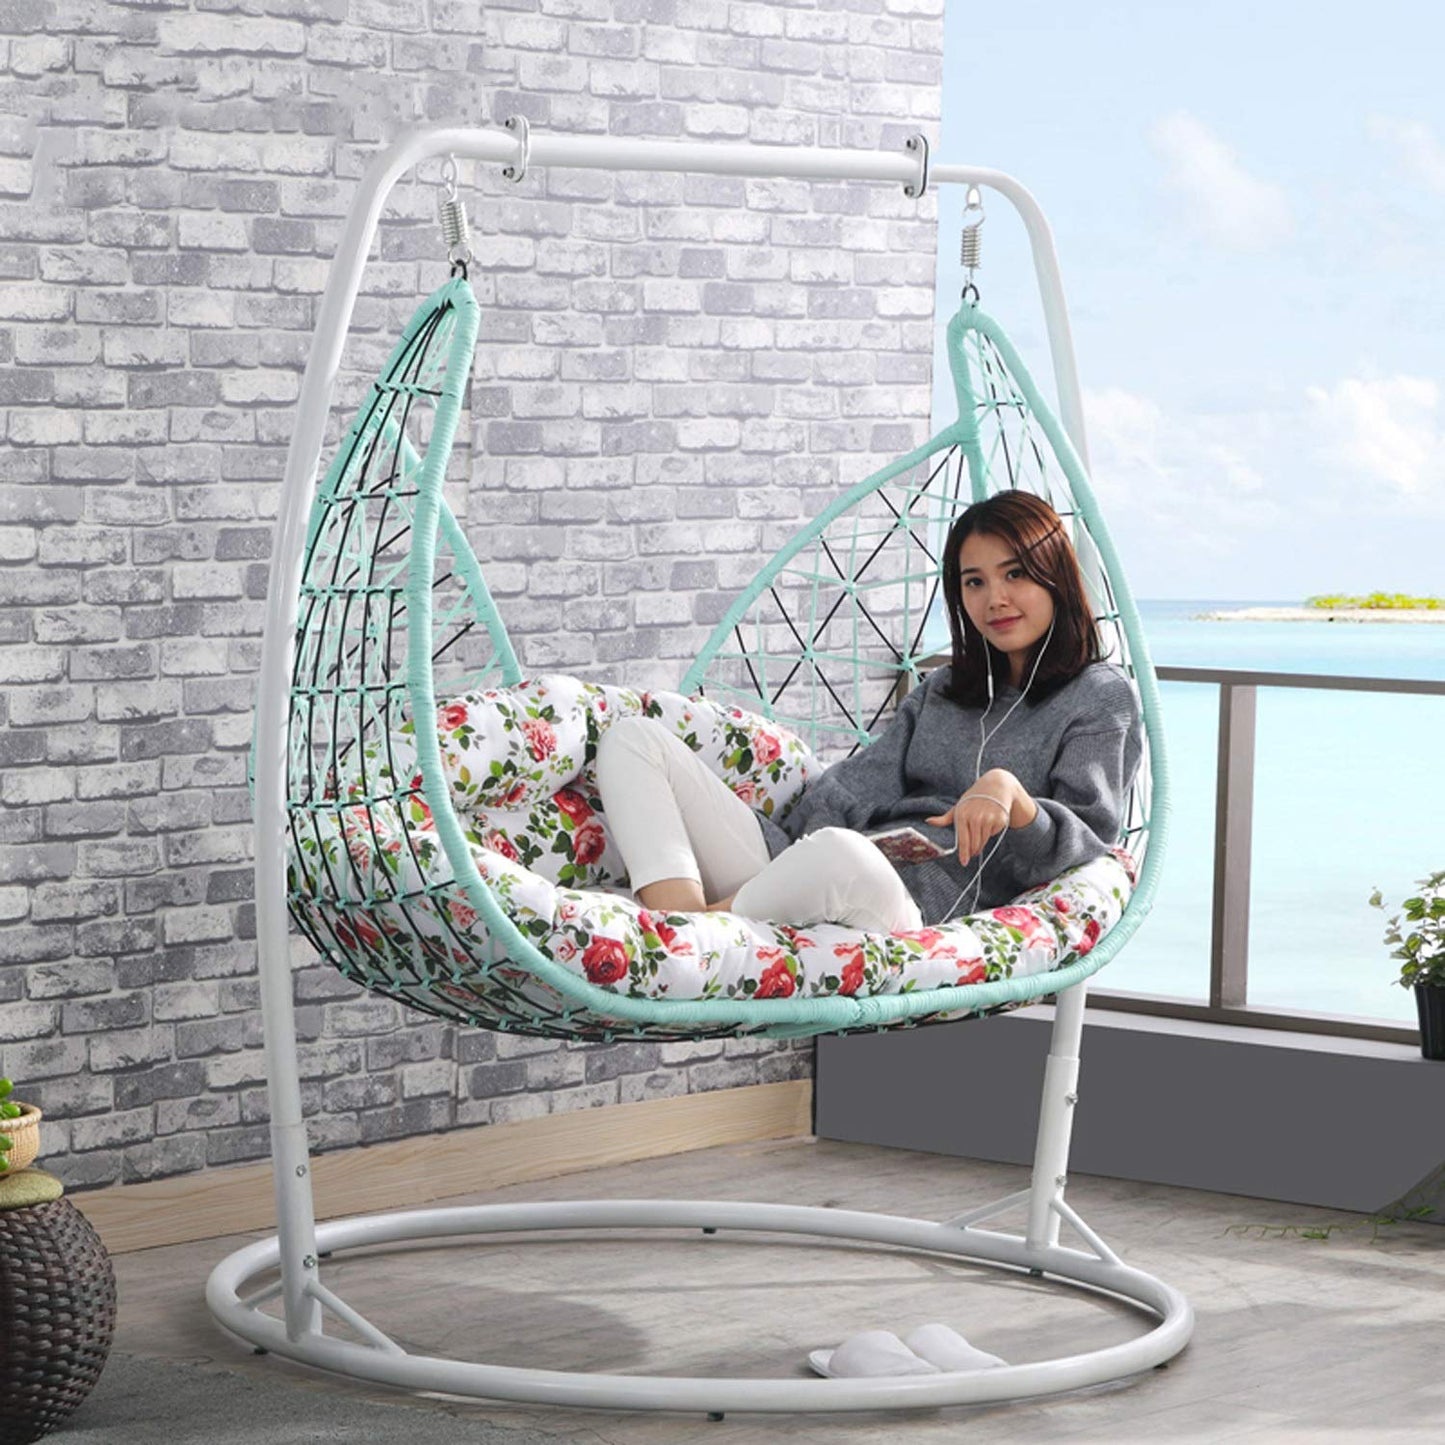 2-Person Outdoor Hanging Basket Chair, Home PE Rattan Egg-Shaped Hammock Chair Indoor Balcony Lunch Break Swing Chair to Send Cushion Bearing Weight 250KG